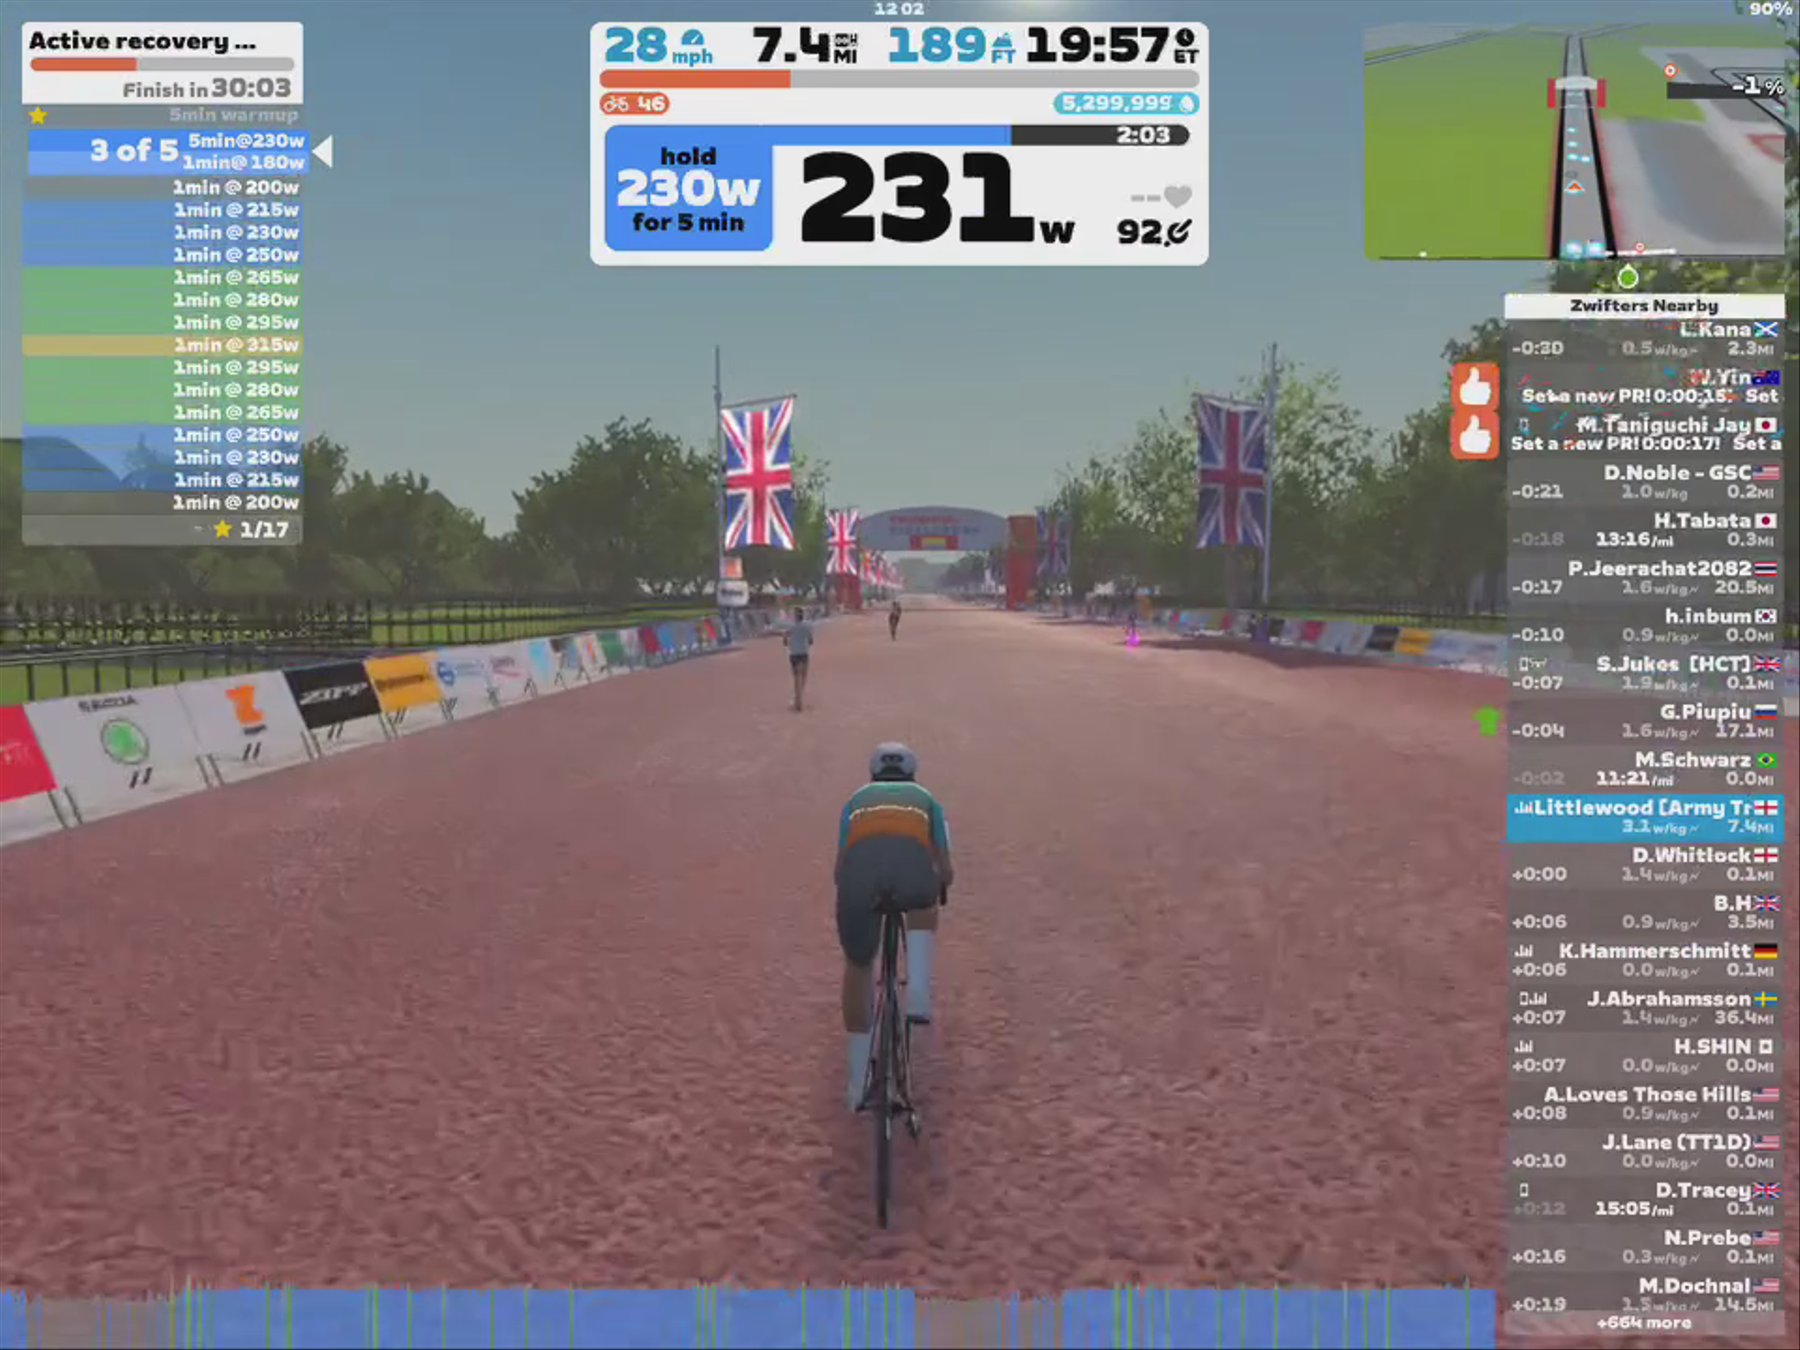 Zwift - Active recovery high cadence plus pyramid in London